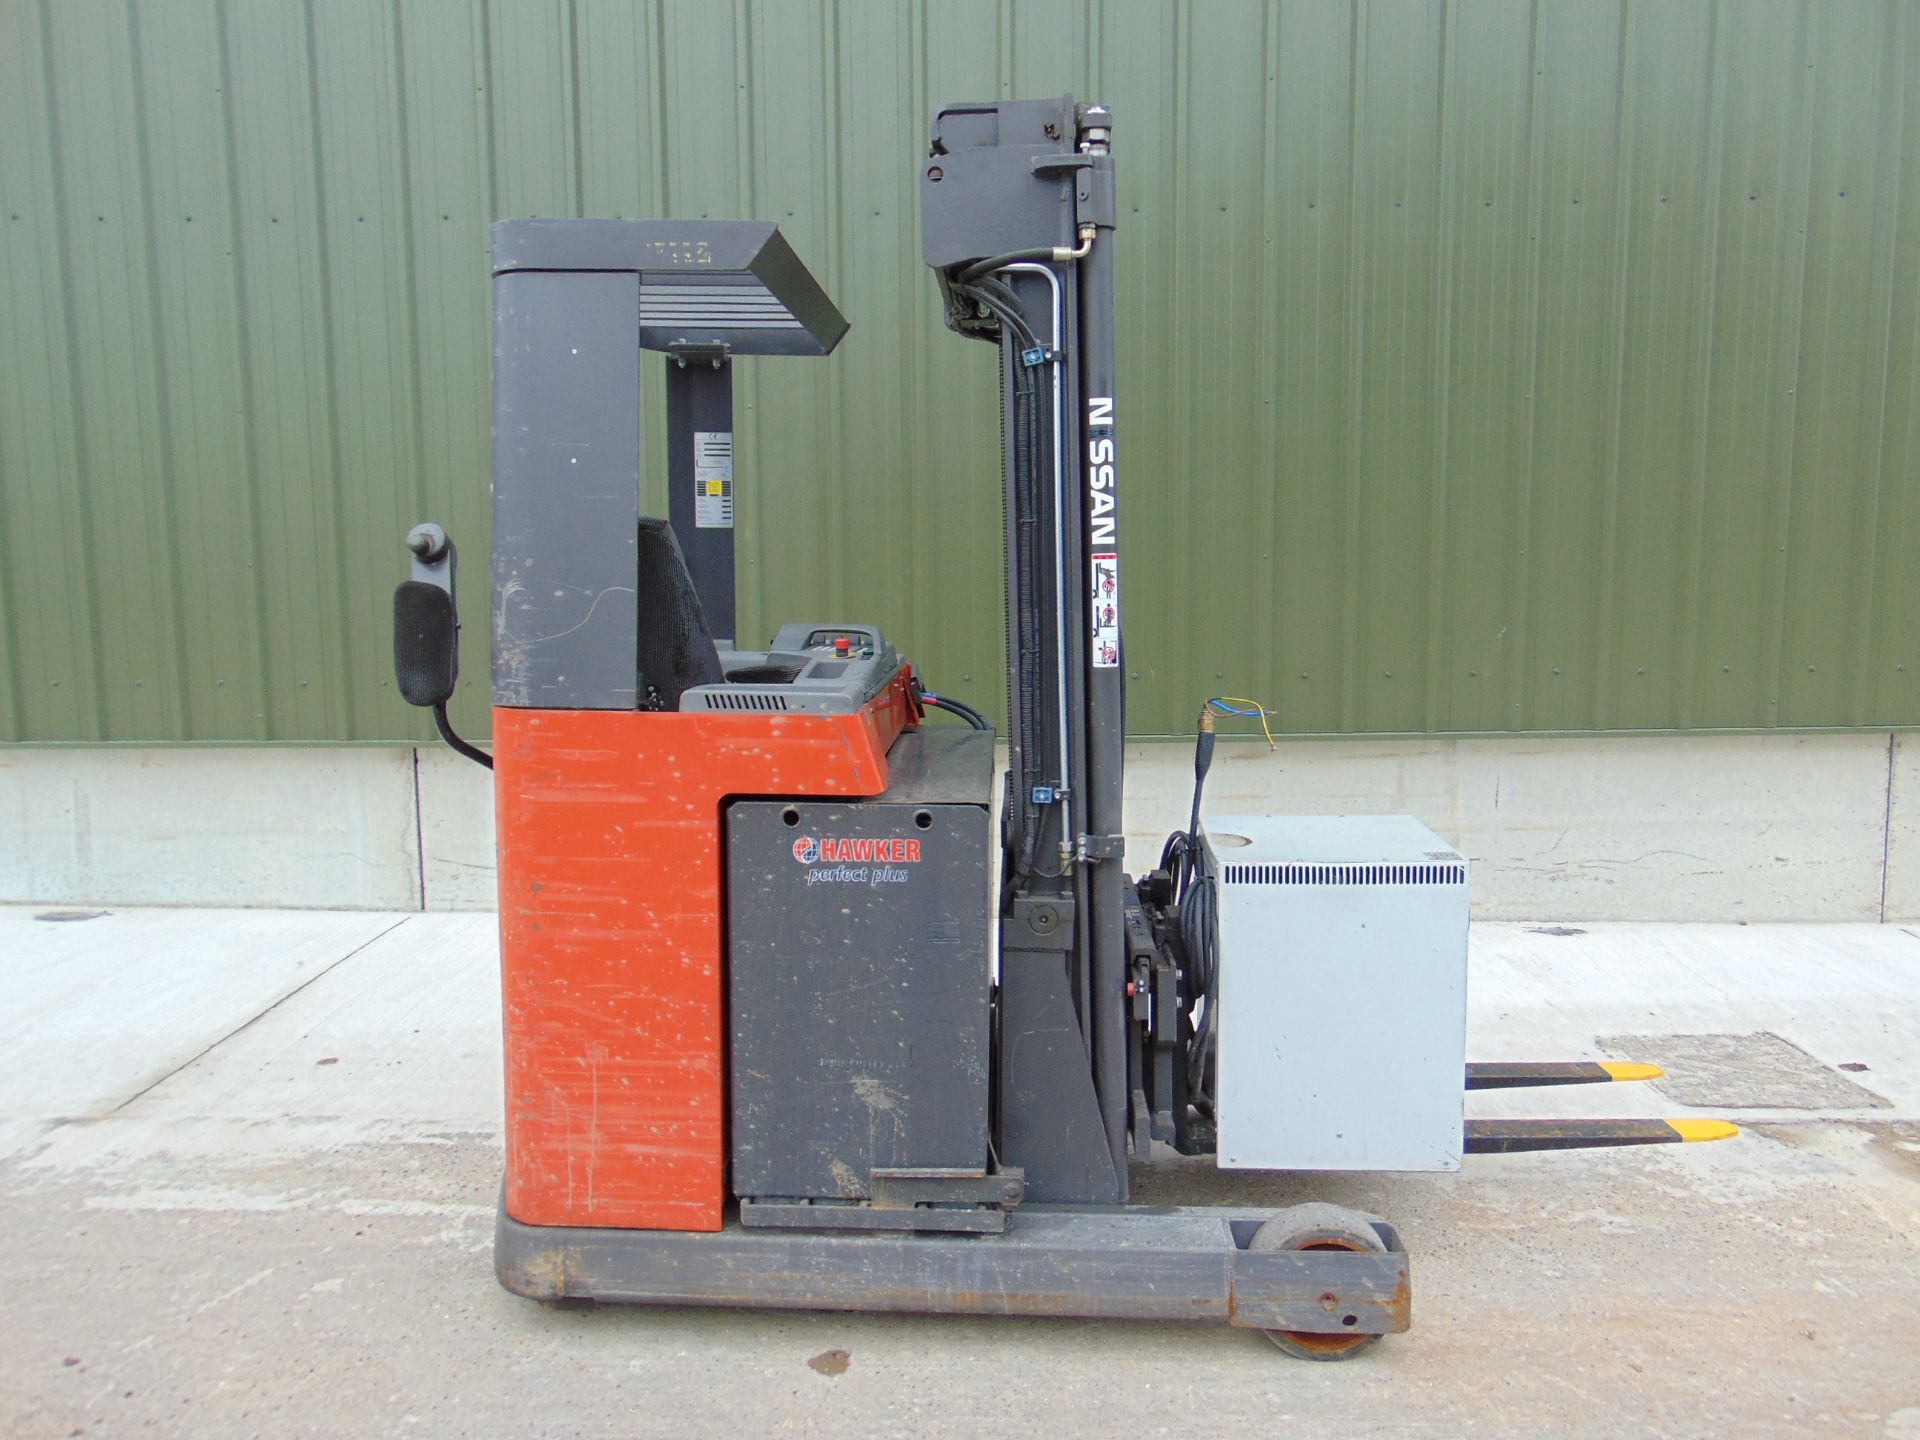 Nissan UNS-200 Electric Reach Fork Lift w/ Battery Charger Unit 2283 hrs